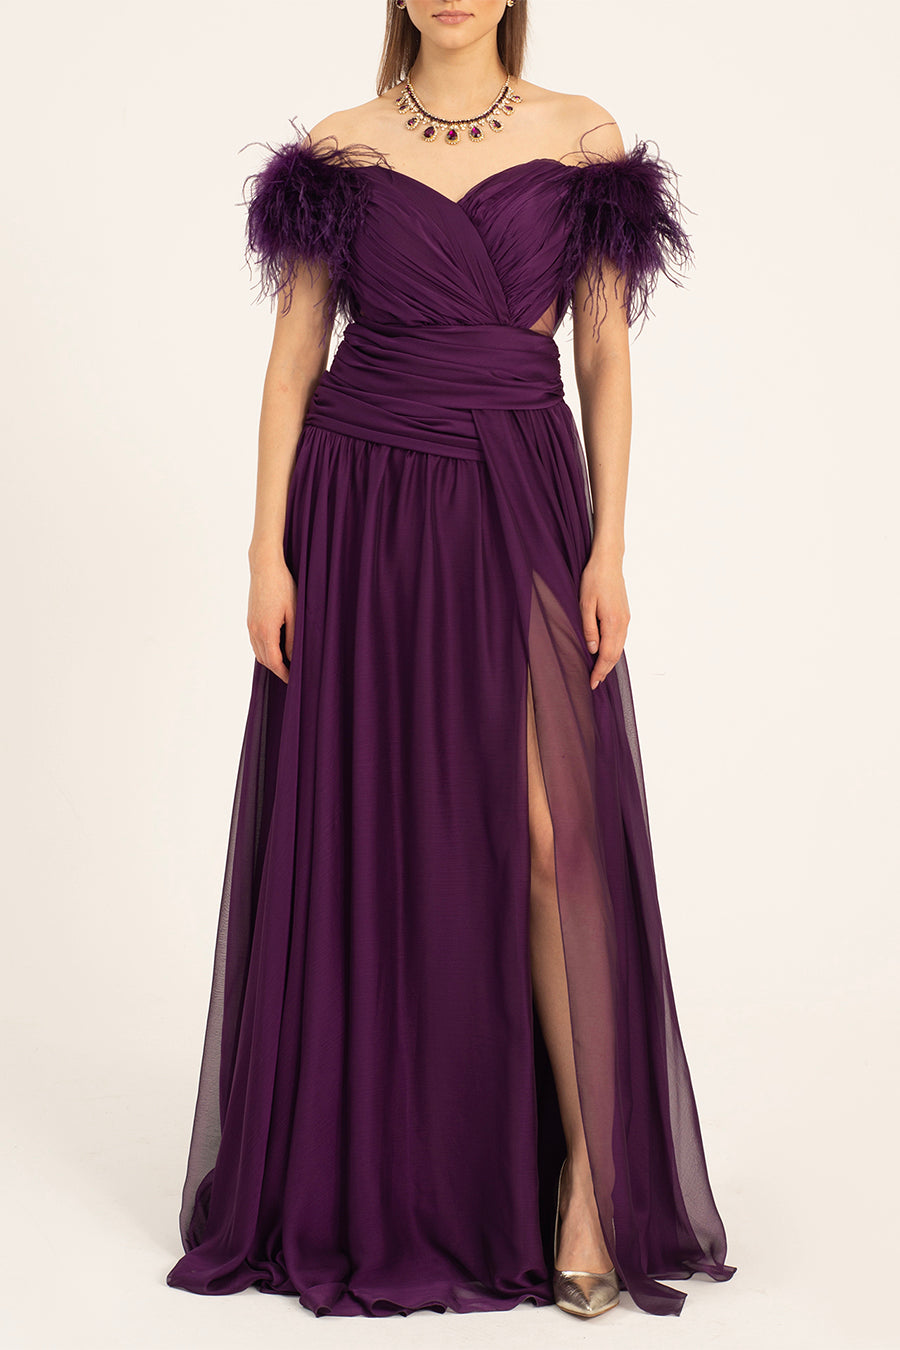 Berenice - Mystic Evenings | Evening and Prom Dresses